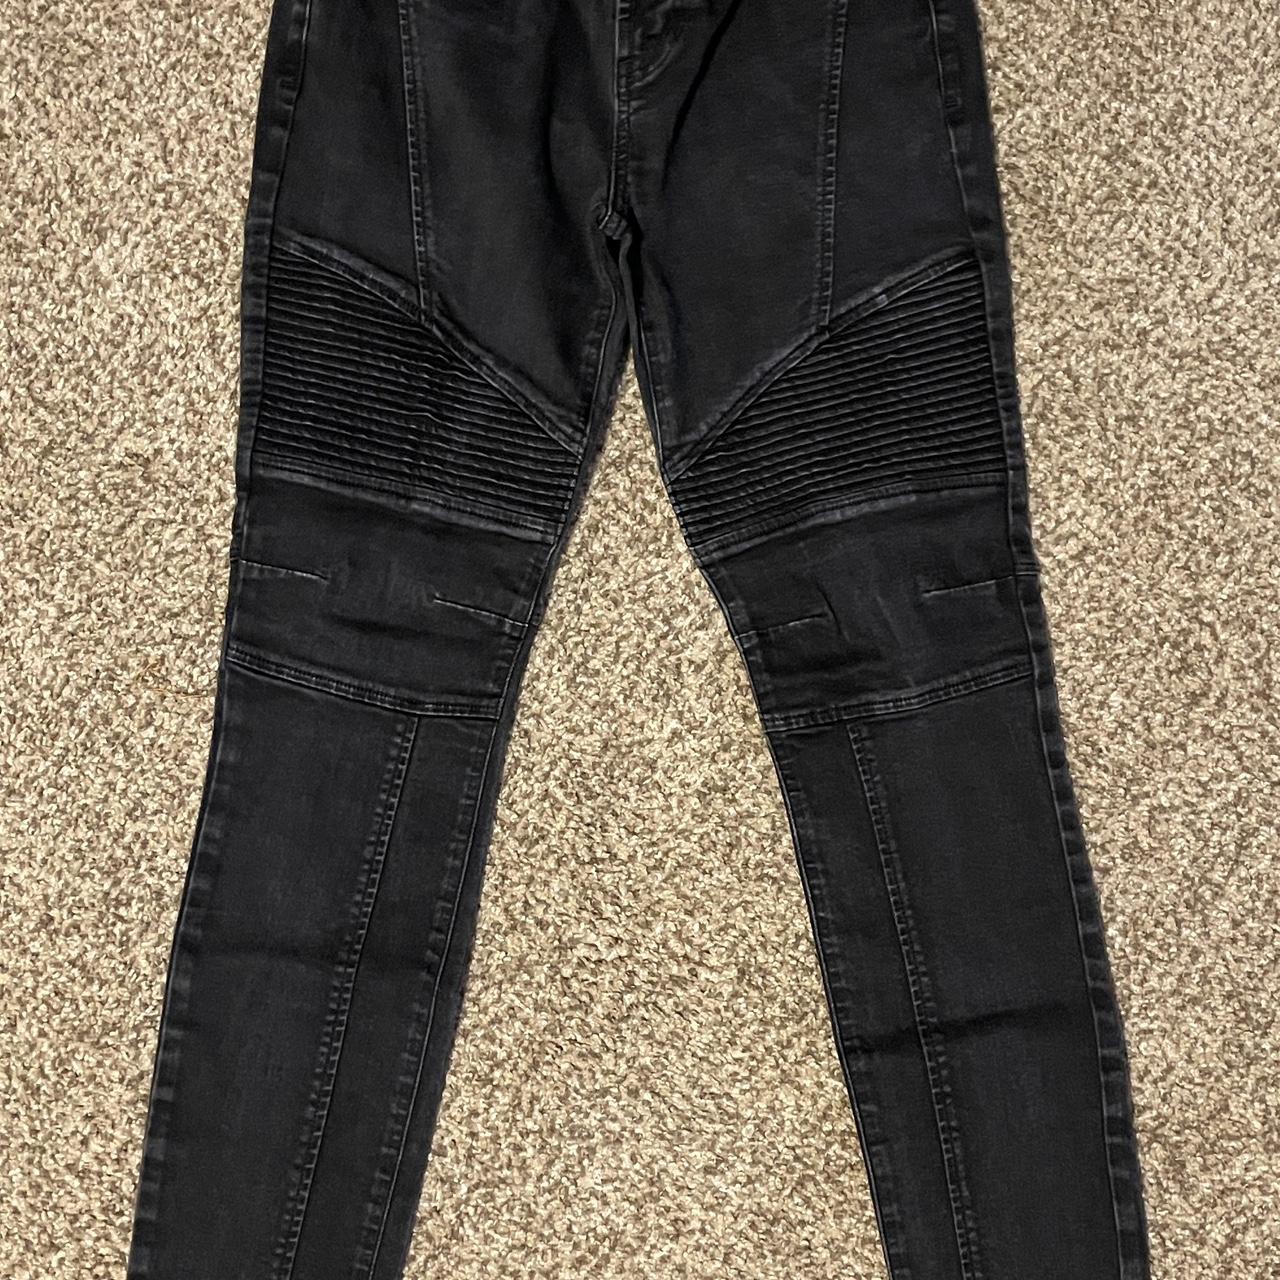 PacSun Jeans Stacked Skinnies Men's 28 Stretchy... - Depop